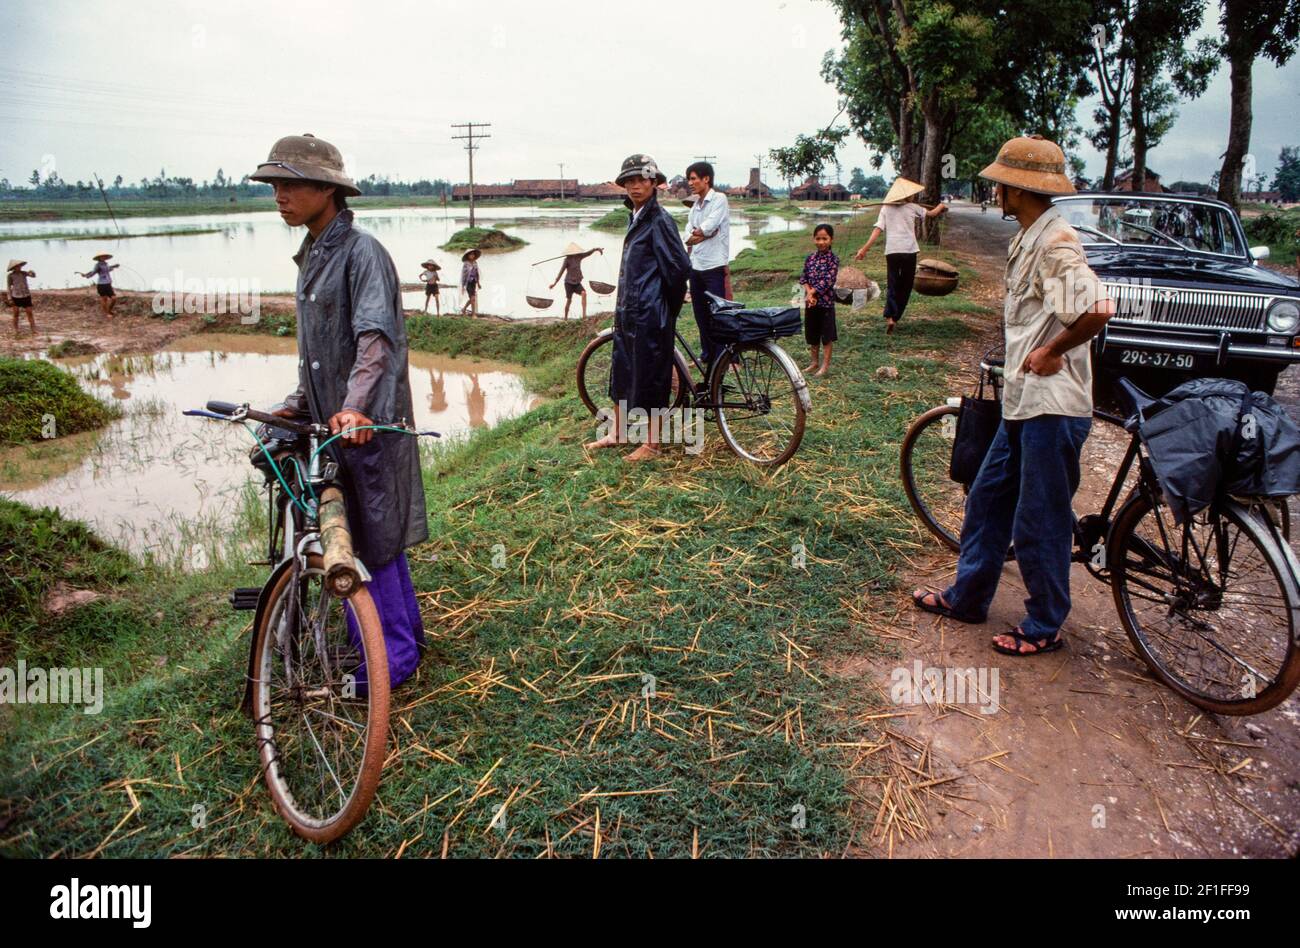 People watching villagers fishing in the fish ponds with their fishing baskets, rural South Vietnam, June 1980 Stock Photo